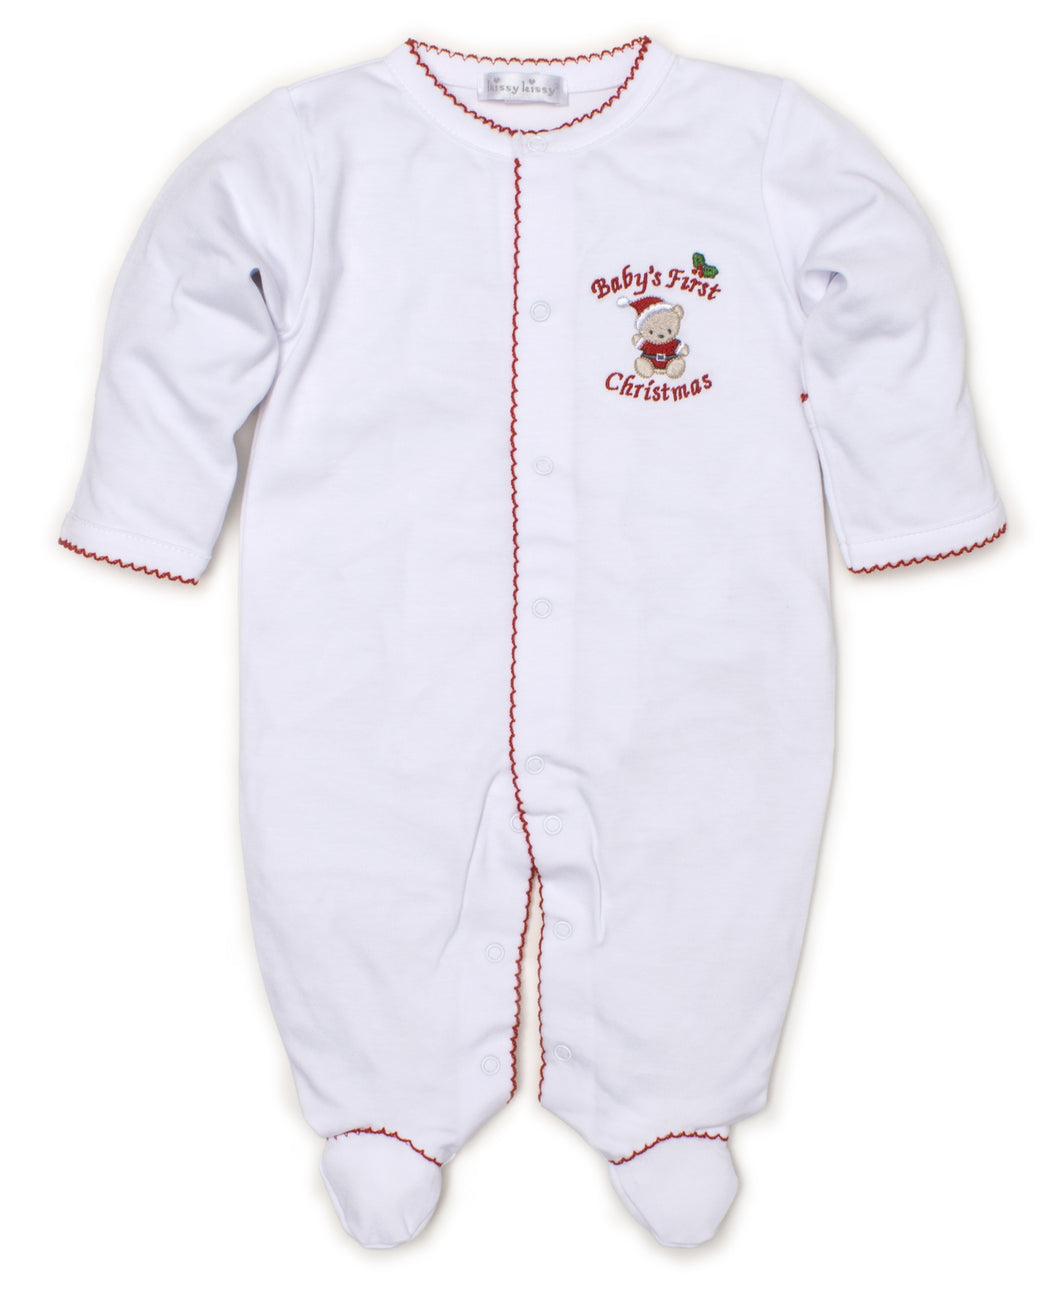 Baby's First Christmas 19 Footie - White/Red